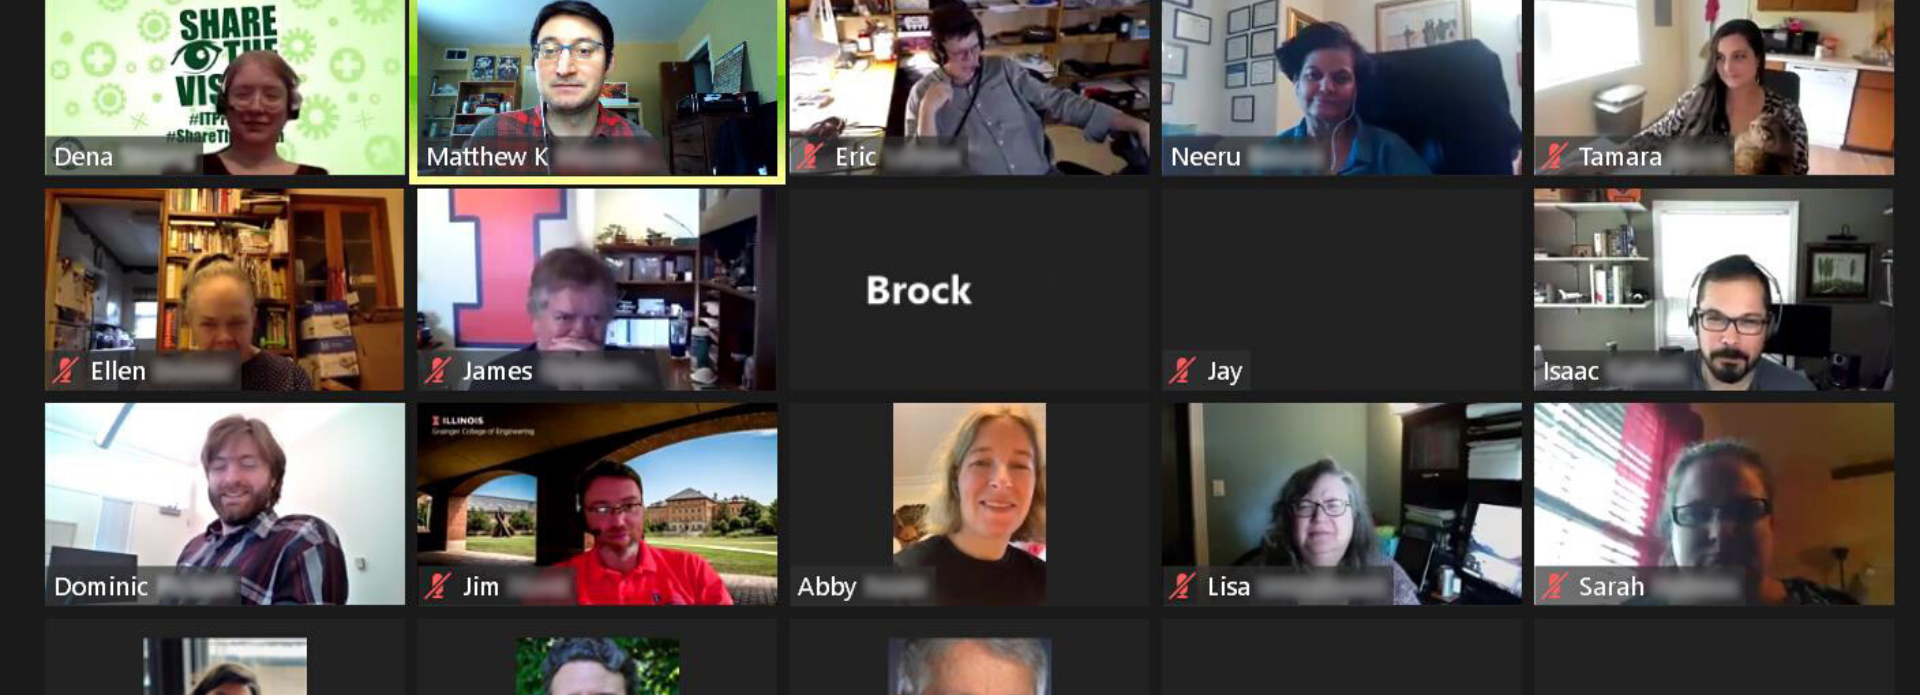 screenshot of Zoom meeting at ITPF with many people in gallery view